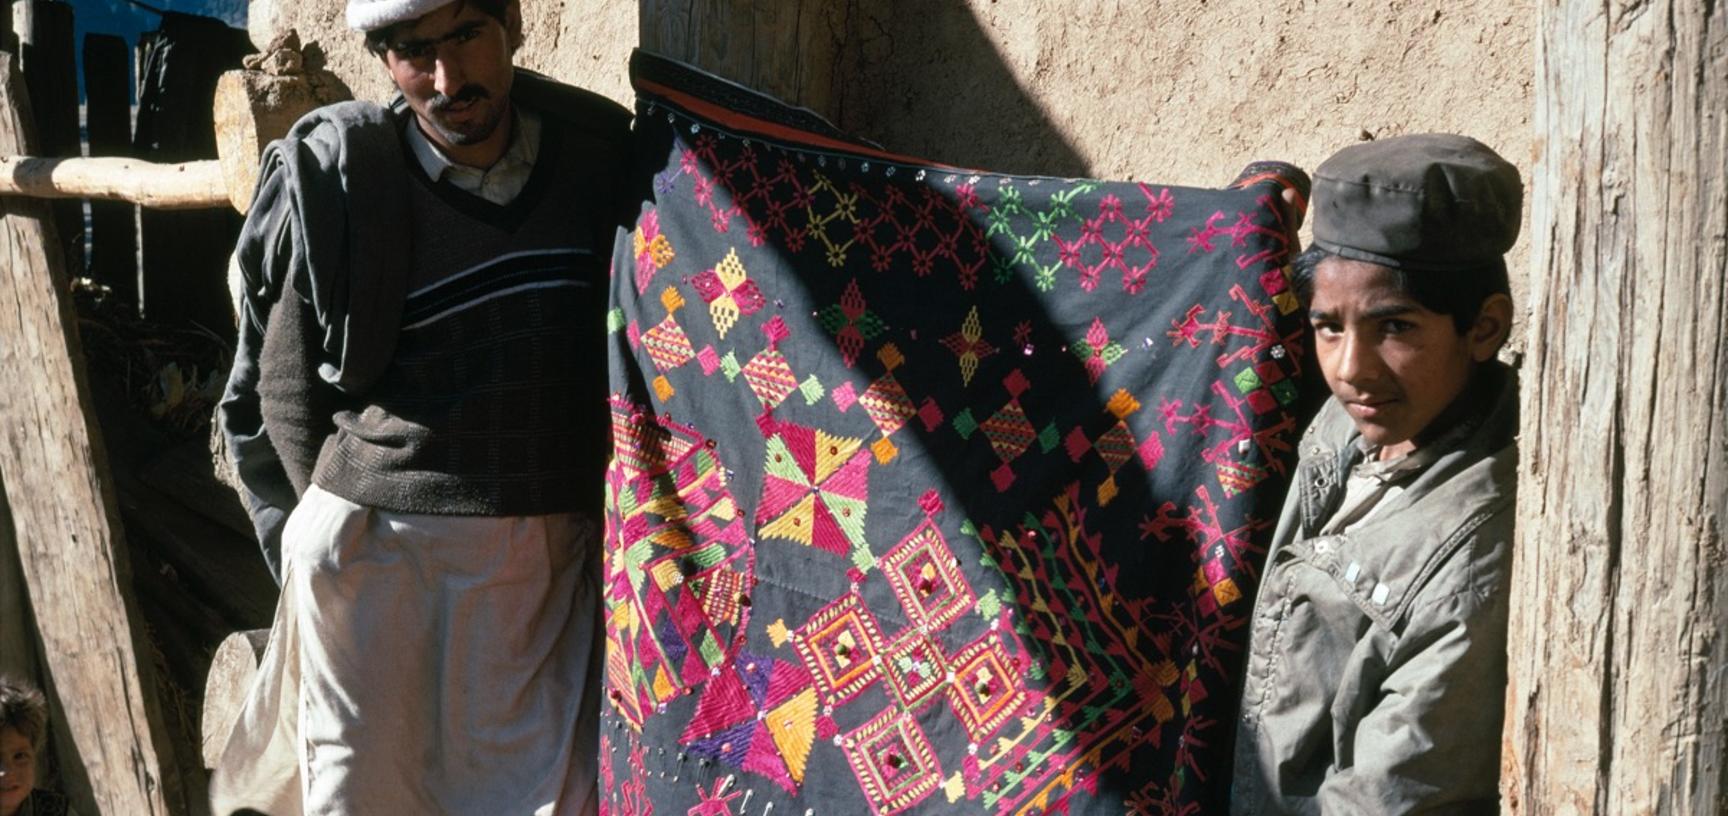 A man and boy holding an embroidered textile, Palas valley, Pakistan.